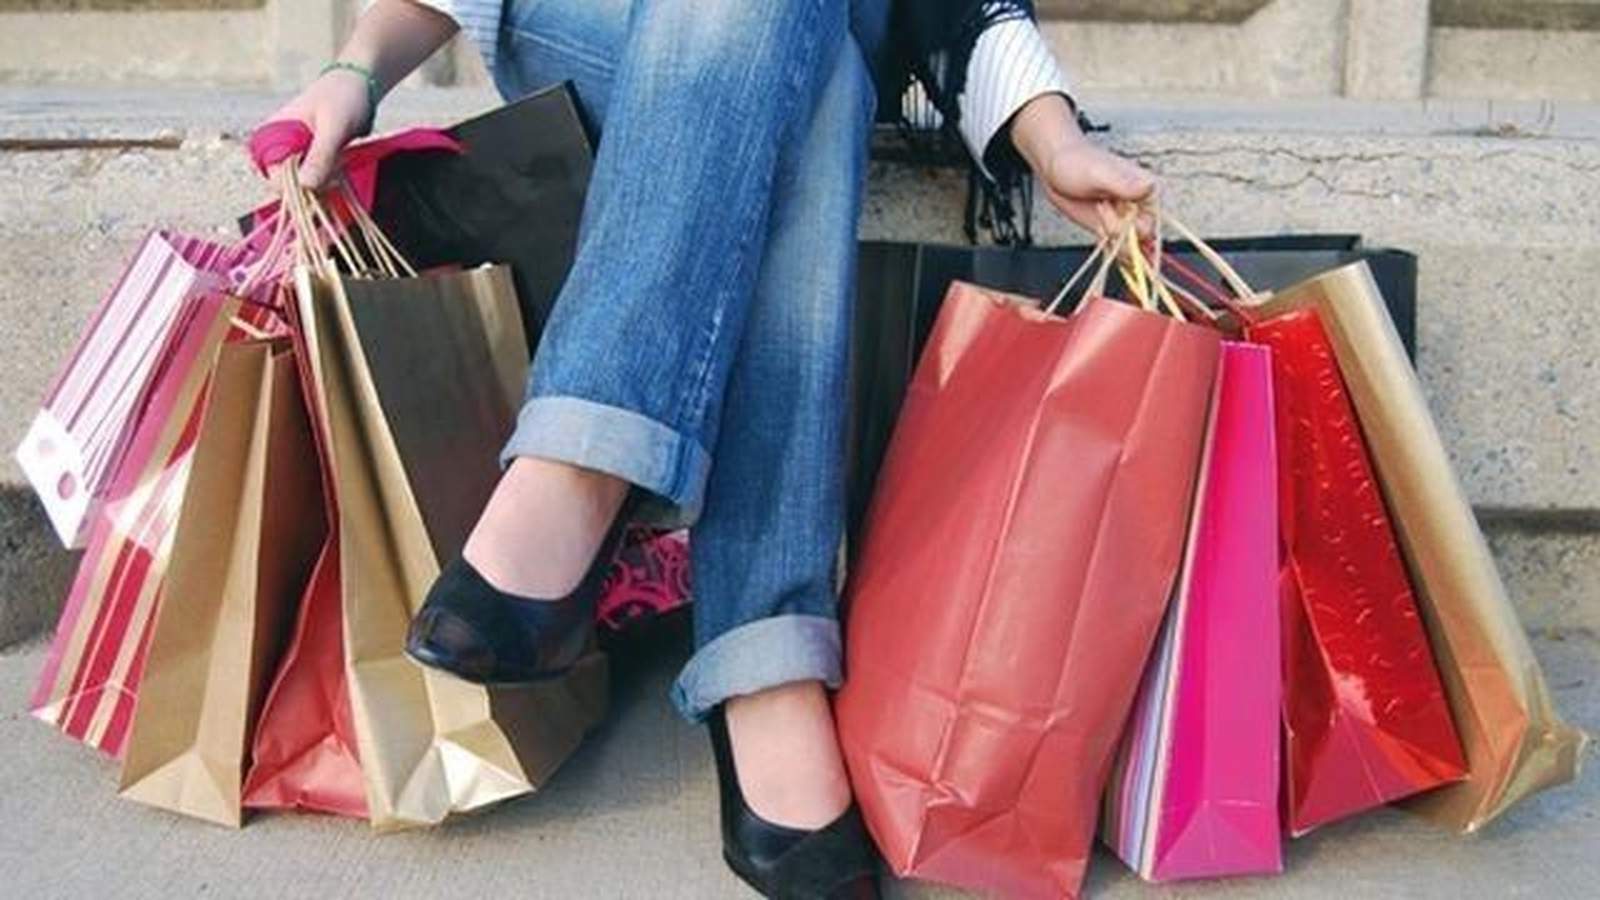 These stores will price match Black Friday deals